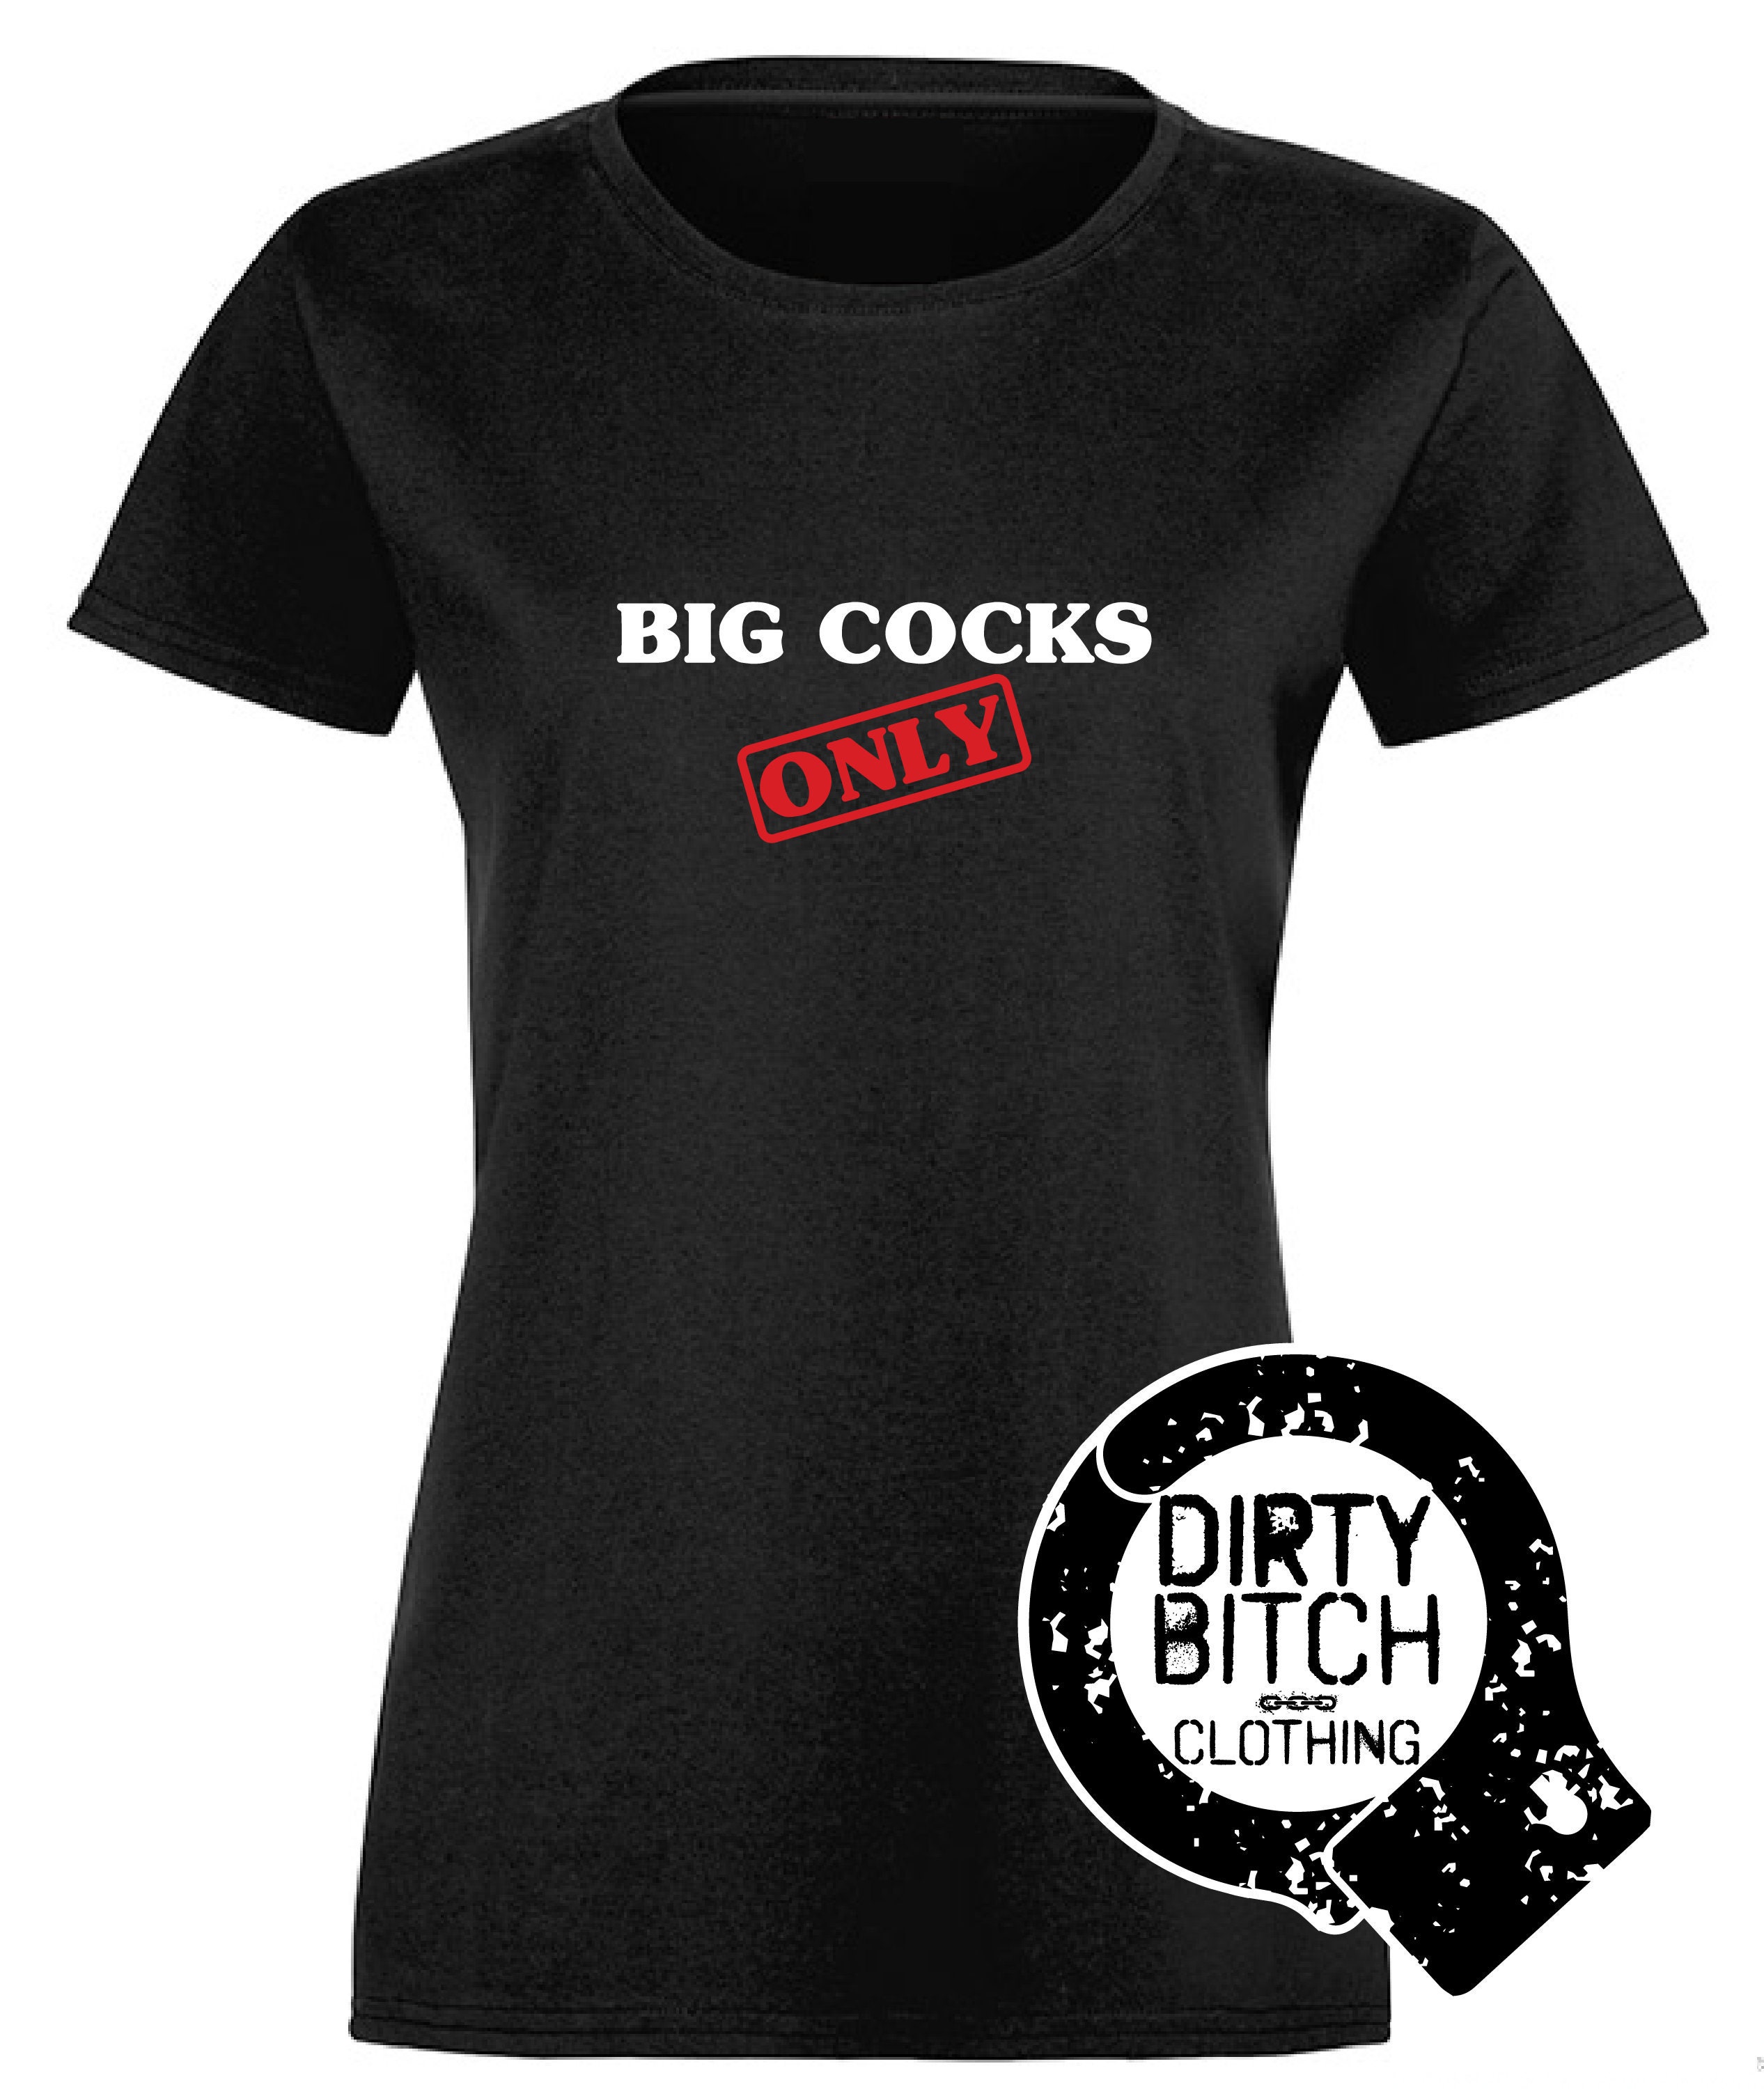 Big Cocks Only Adult T-shirt Clothing Boobs Hotwife picture